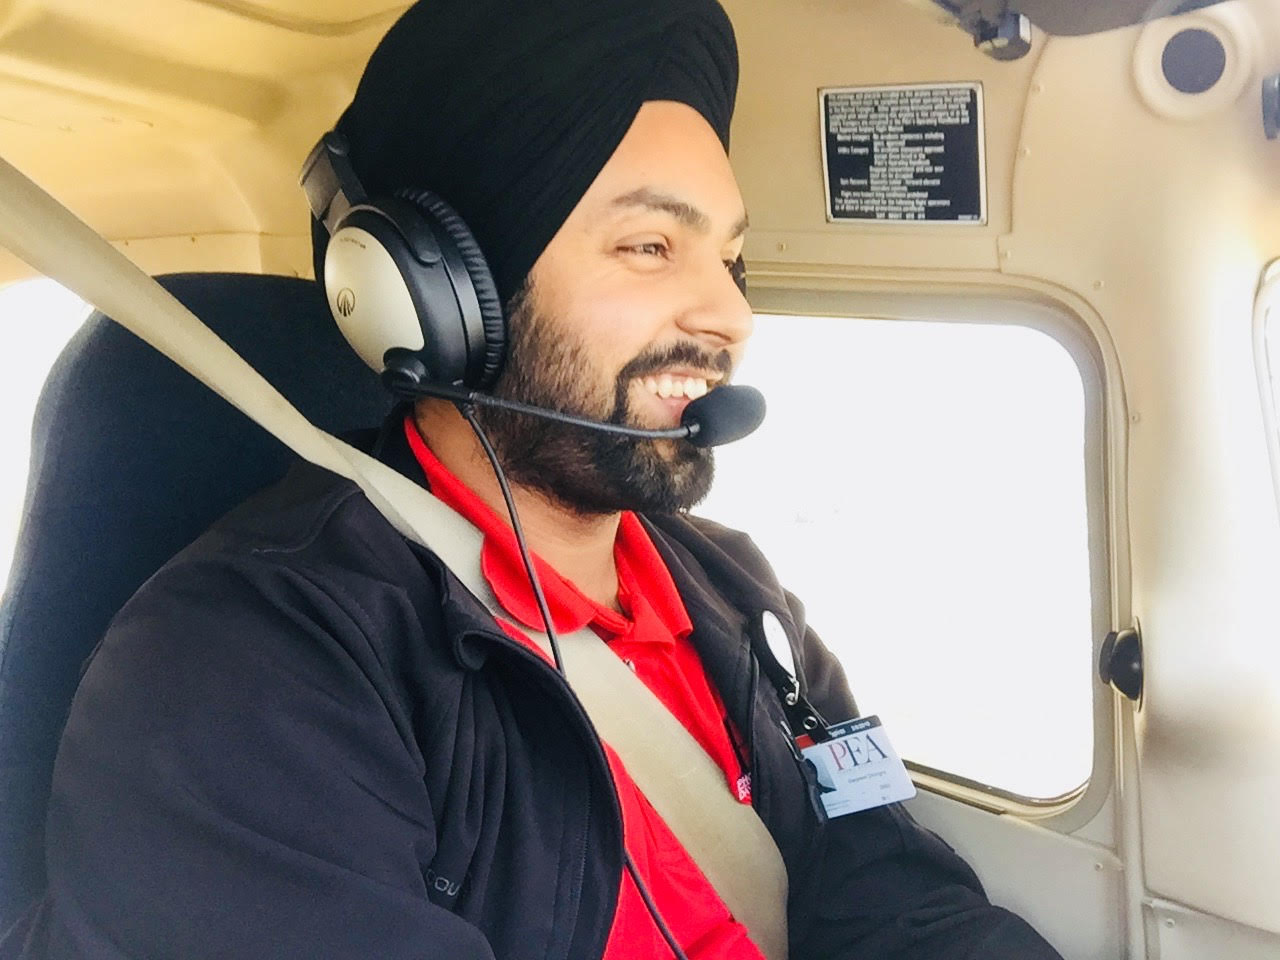 Dhingra side profile shot of him smiling with red polo and headset on, while flying